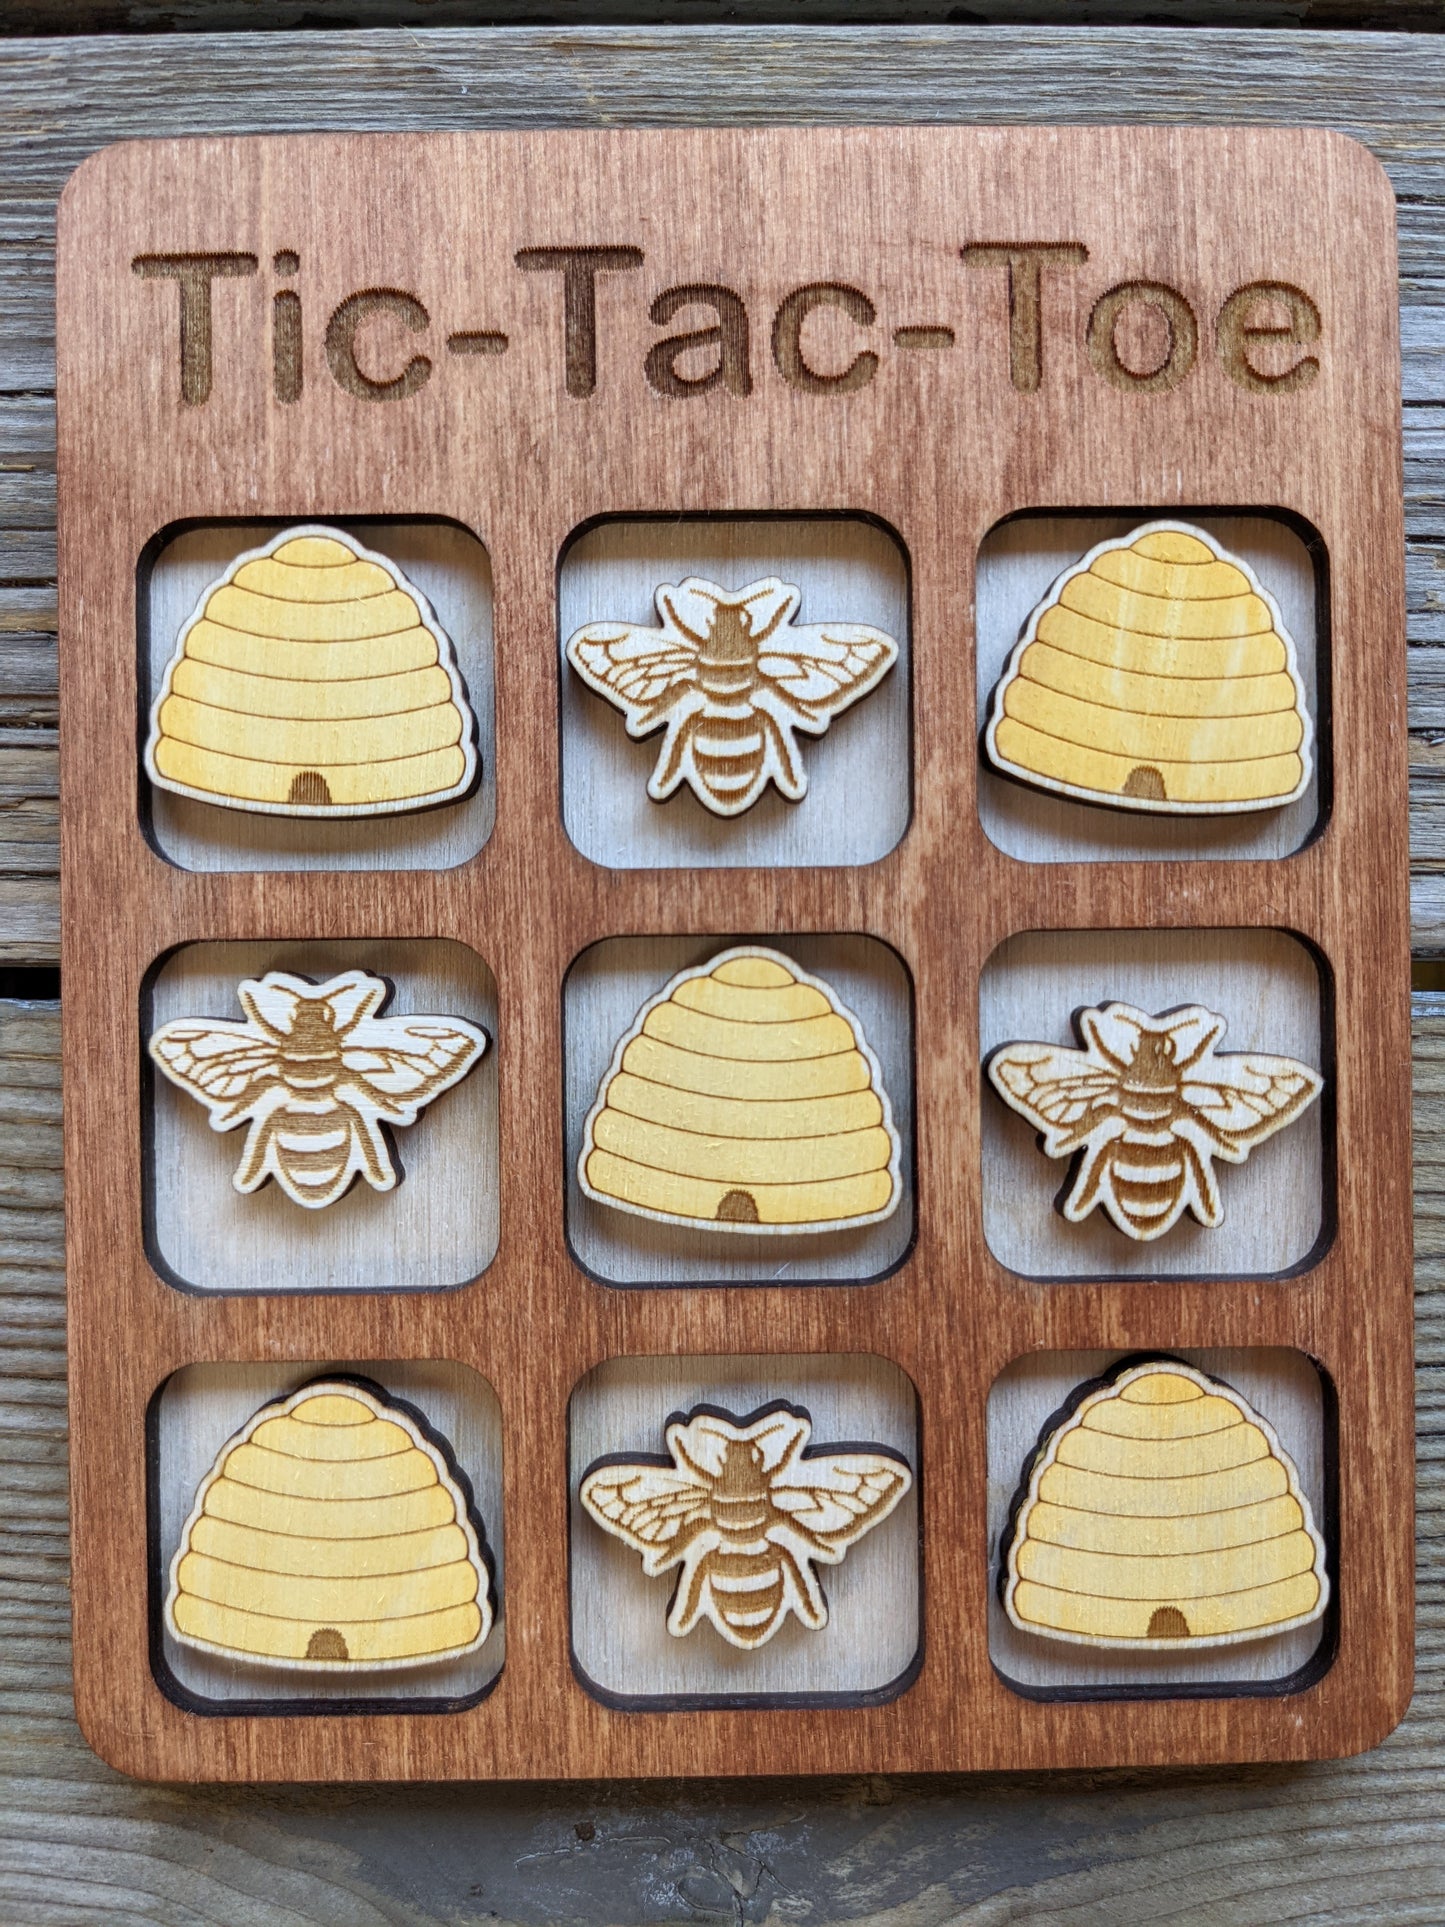 Personalized Tic Tac Toe Game game board 15.00